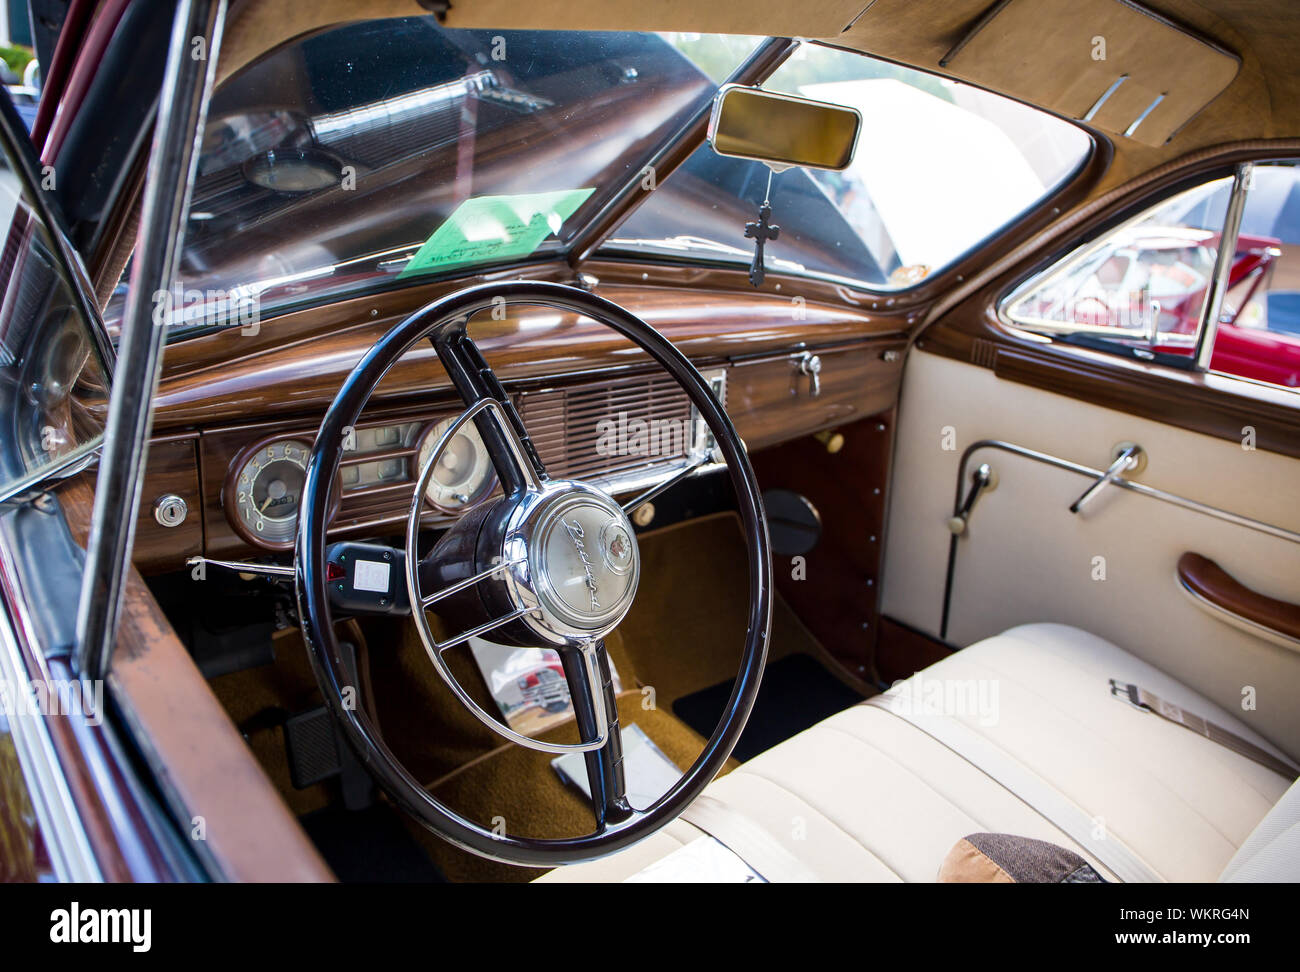 Interior view of a classic 1948 Packard automobile on display at a classic car show in Matthews, North Carolina. Stock Photo